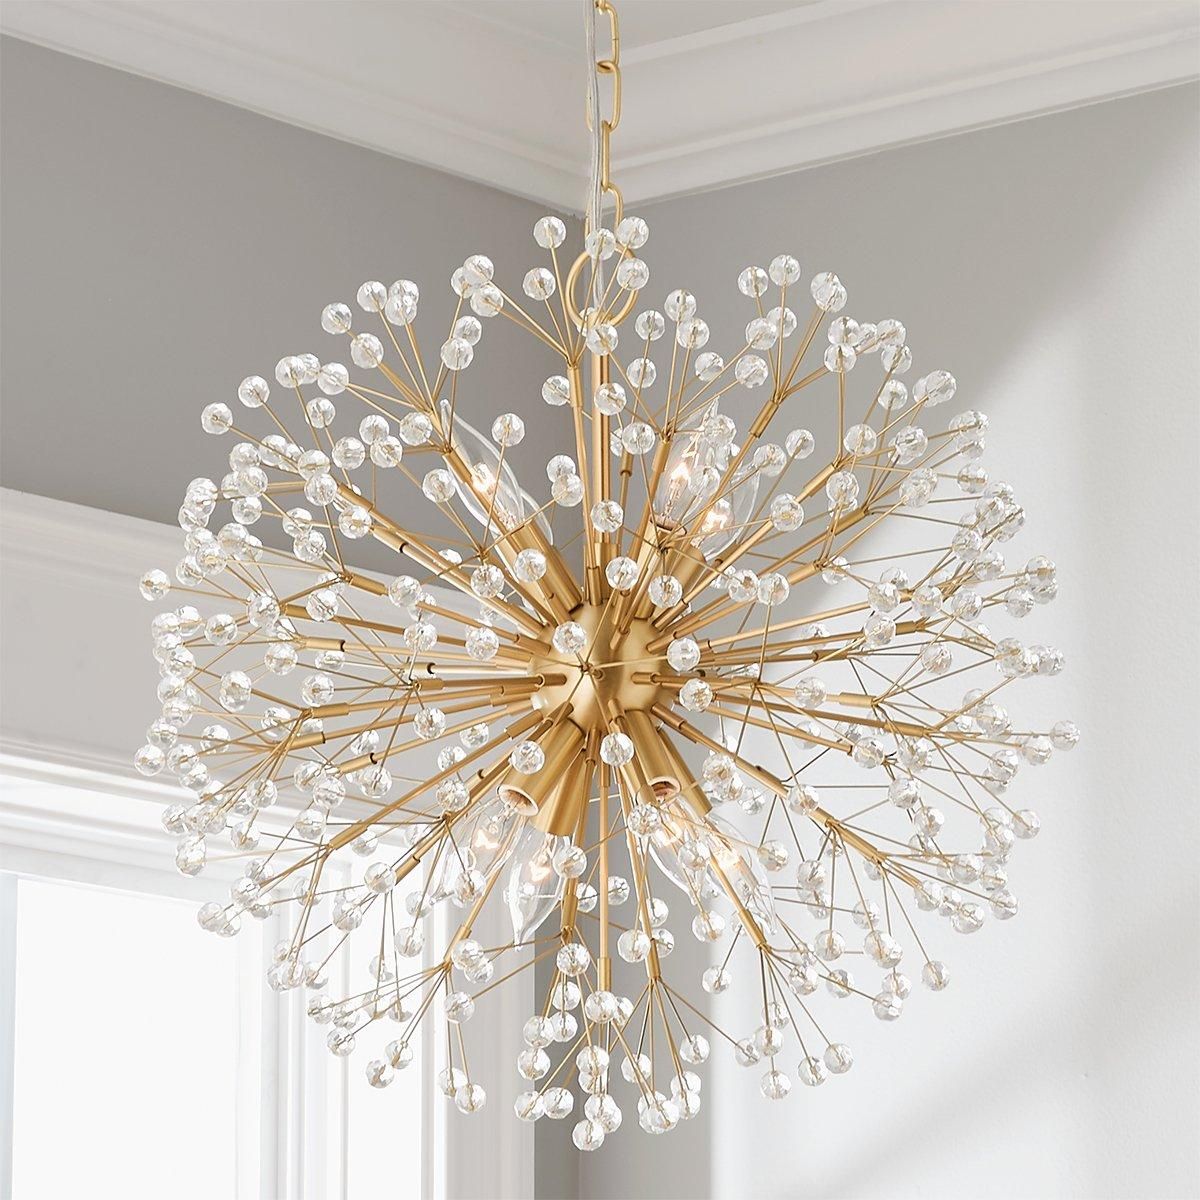 Crystal Dandelion Chandelier - Small | Shades of Light